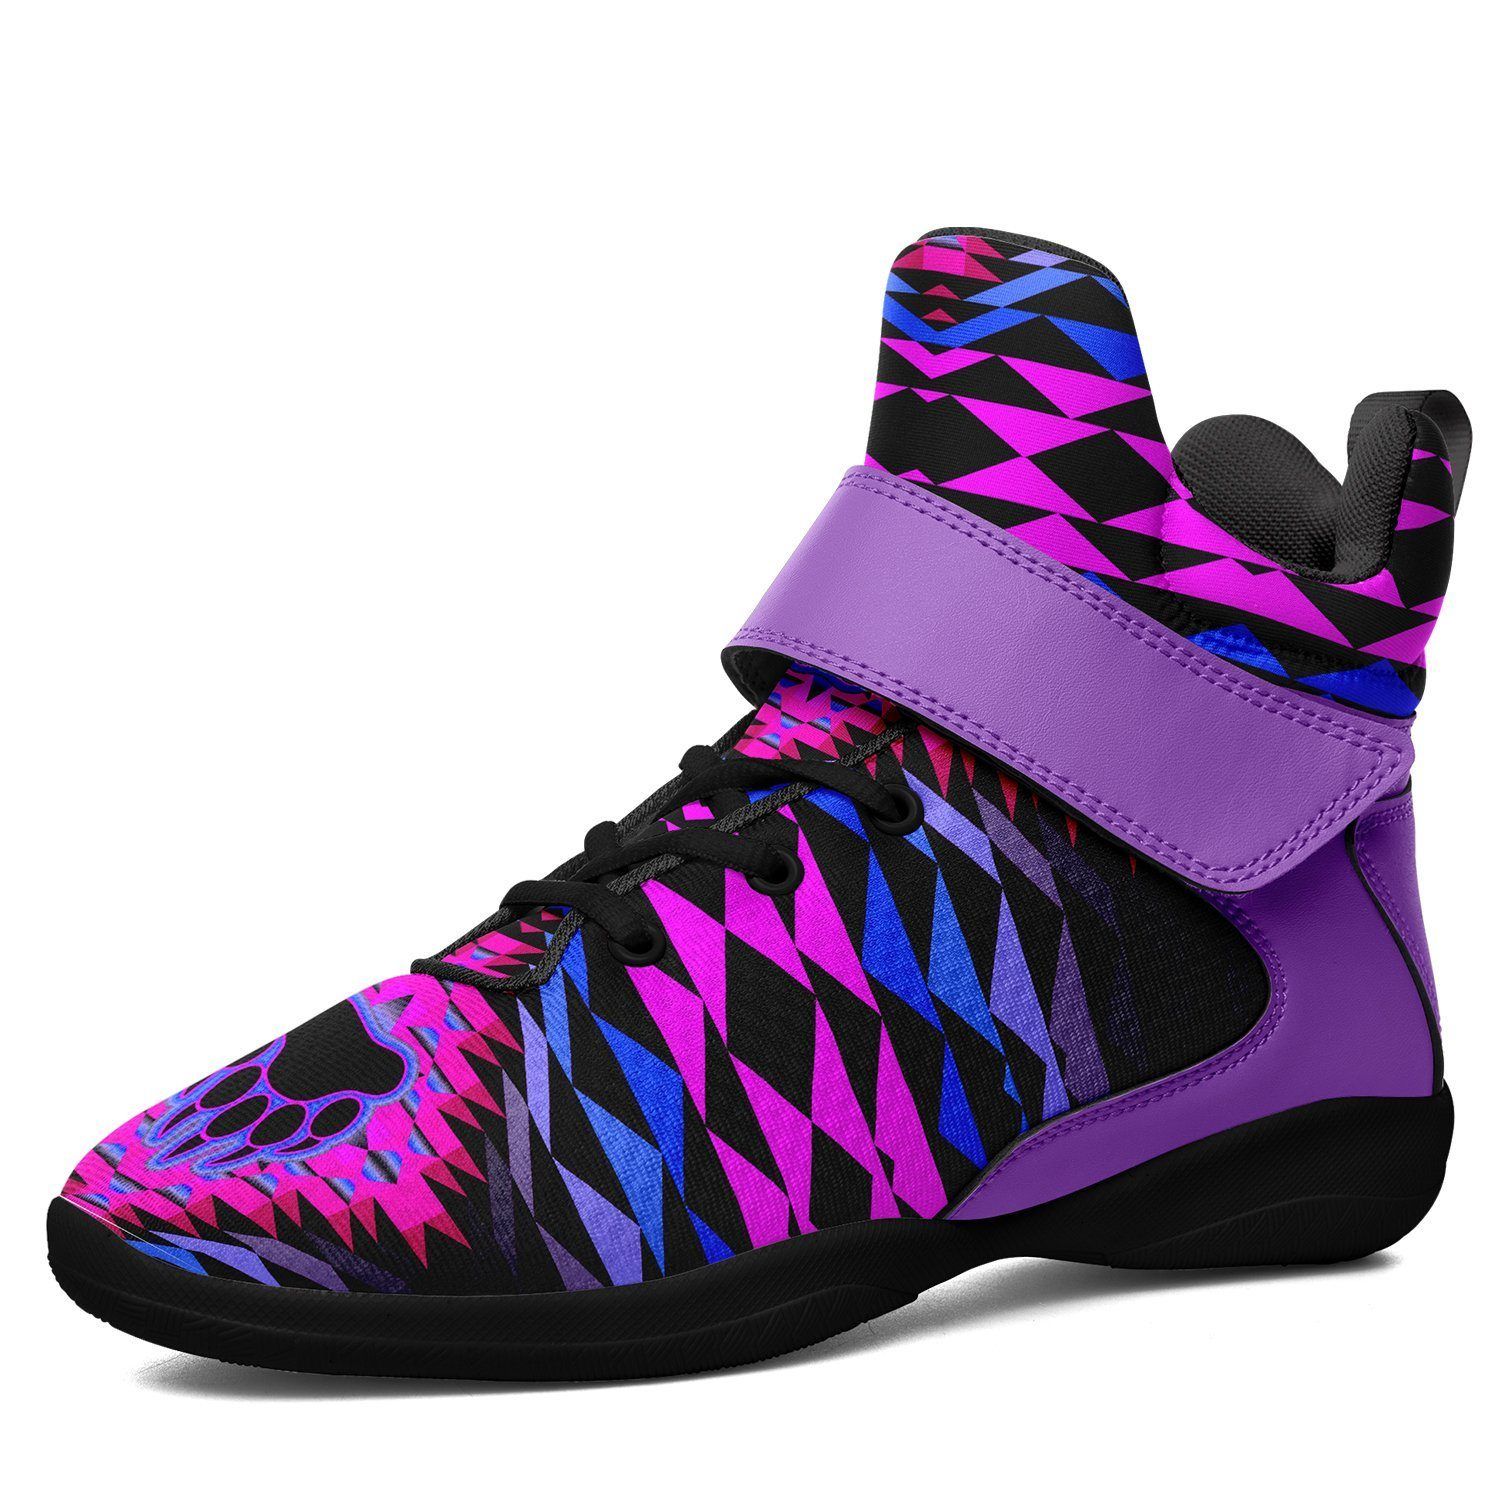 Sunset Bearpaw Blanket Pink Ipottaa Basketball / Sport High Top Shoes - Black Sole 49 Dzine US Men 7 / EUR 40 Black Sole with Lavender Strap 